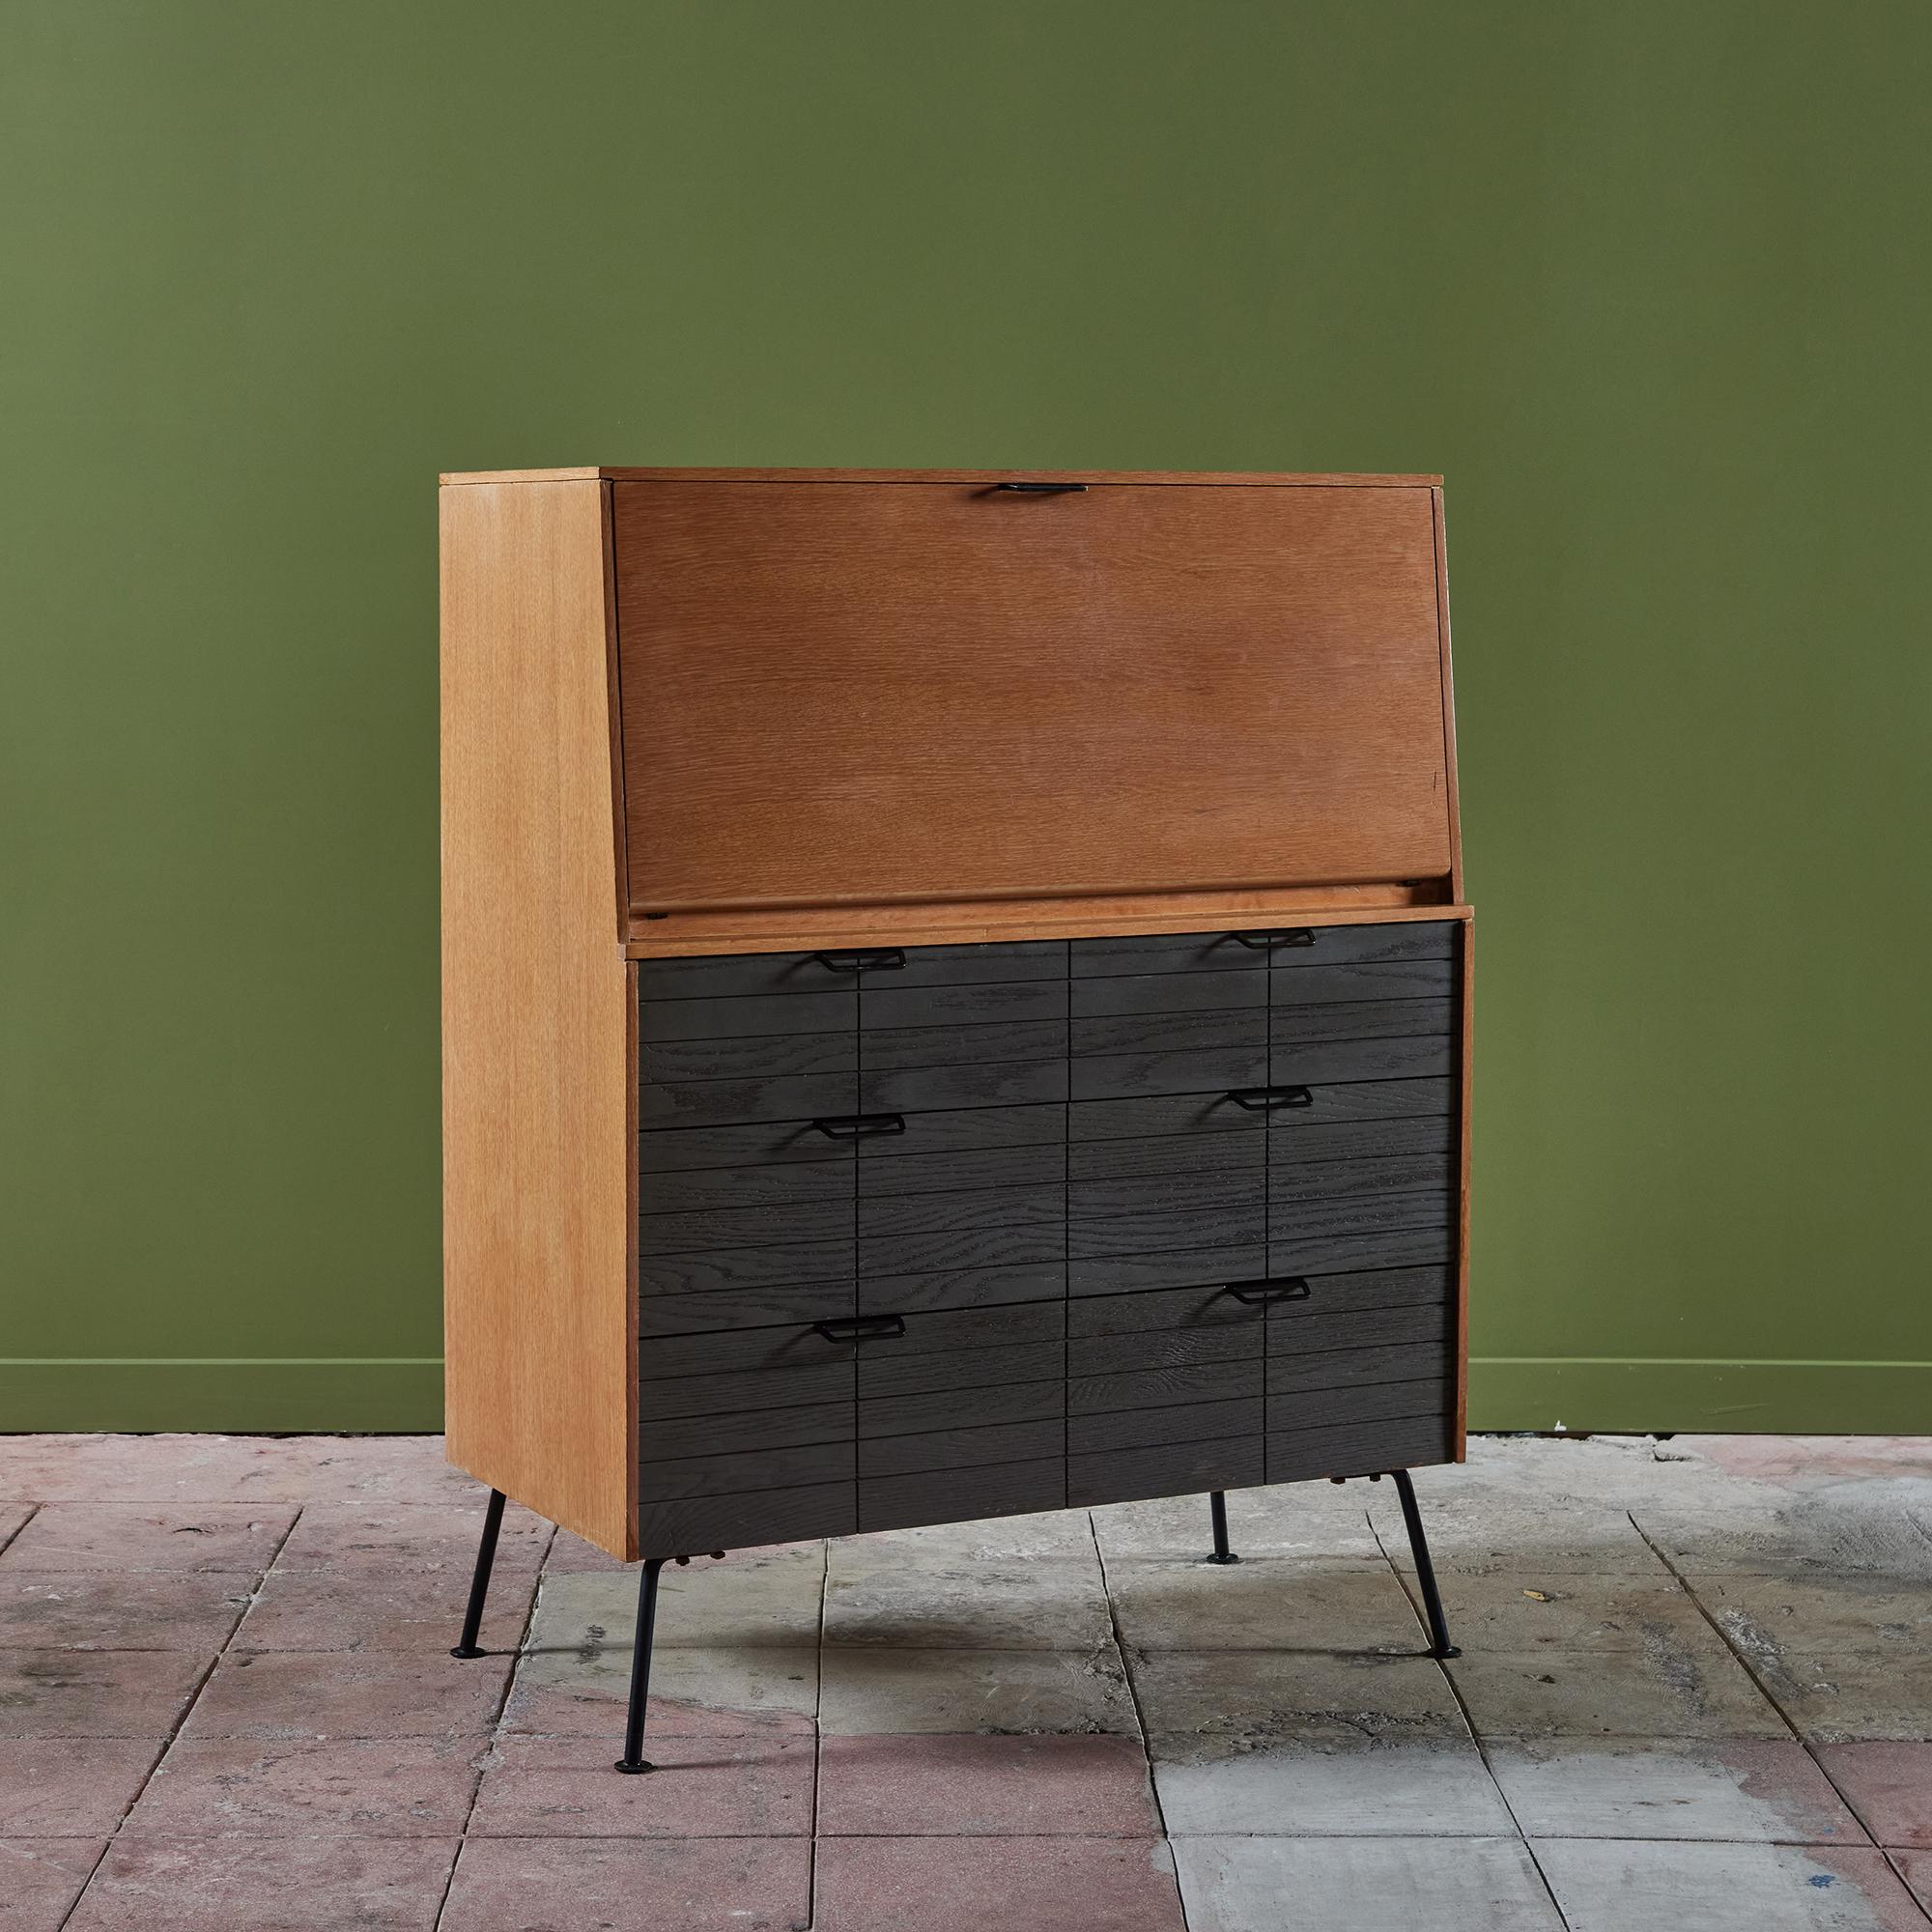 Oak secretary desk by Raymond Loewy for Mengel Furniture c.1950s, USA. This drop front oak desk features three cerused front oak drawers. The interior of the desk has drawers and shelves for storage and office accessories. The piece rests on four